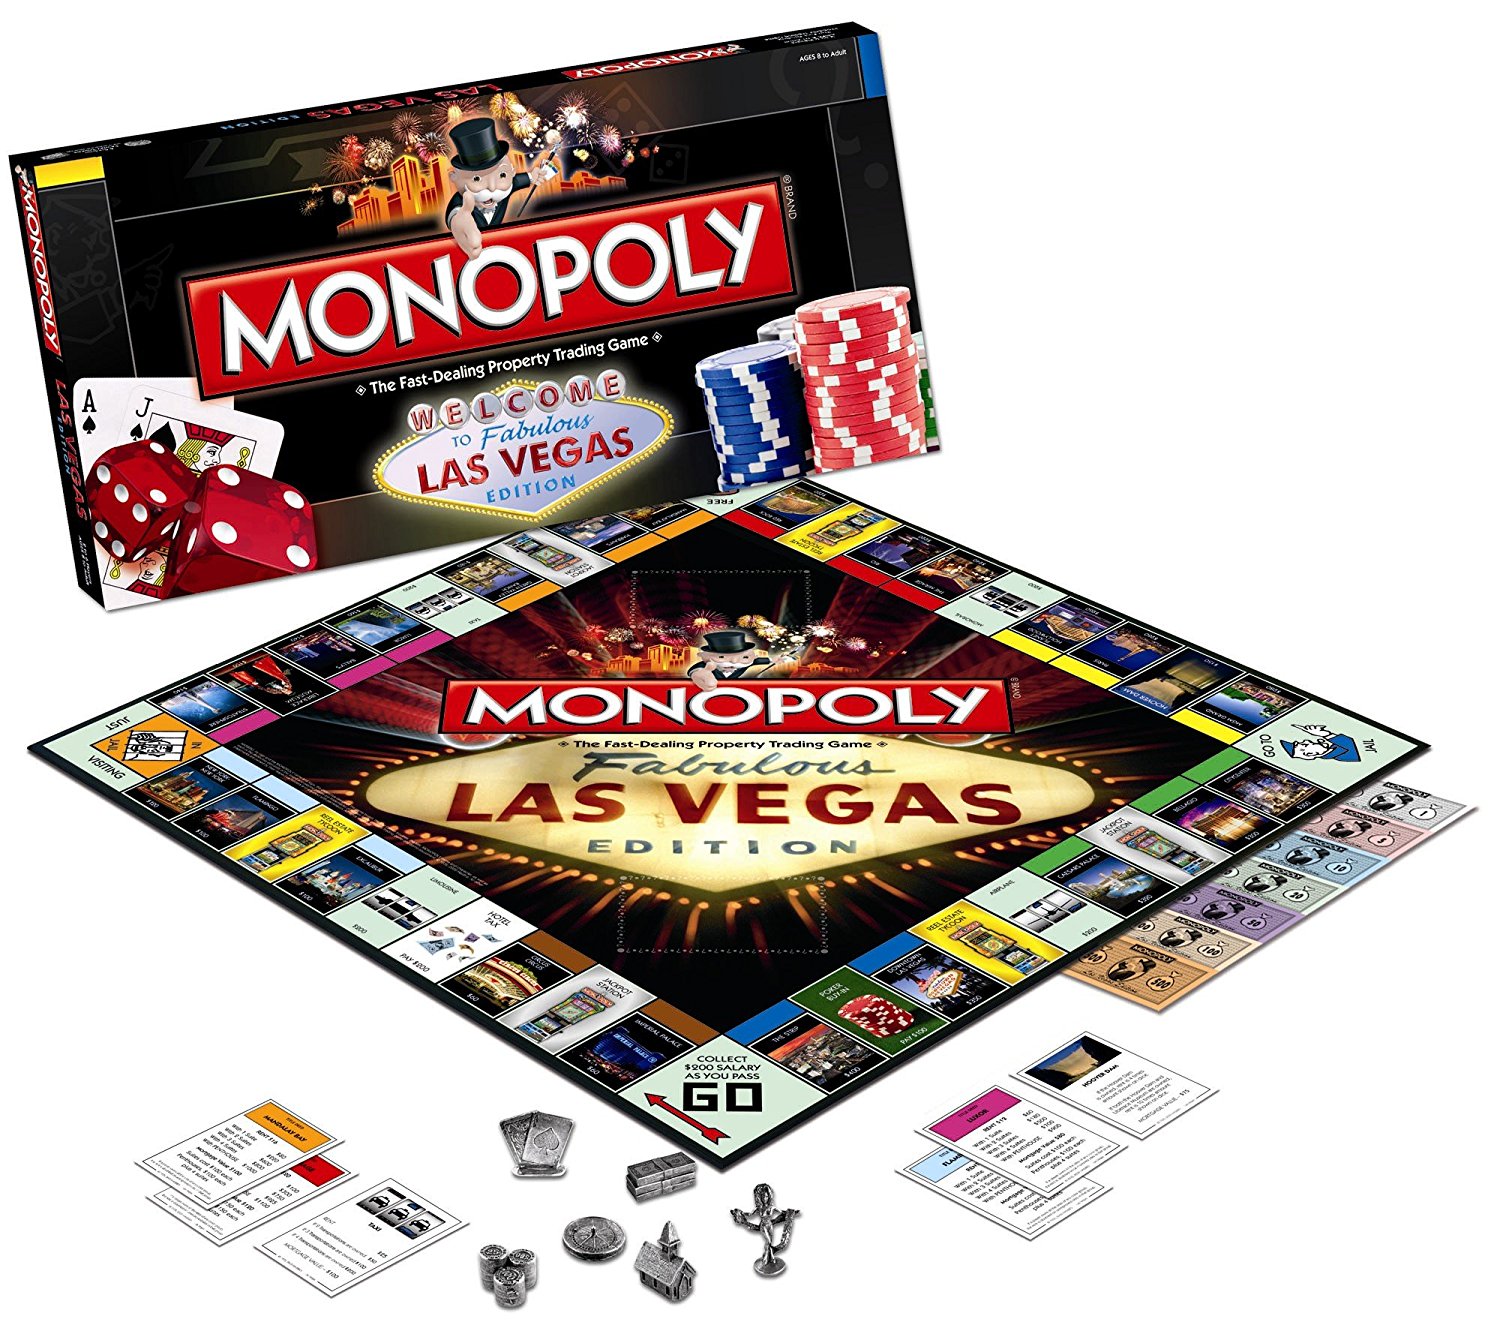 Monopoly Ports Casino games Software on the internet Gamble